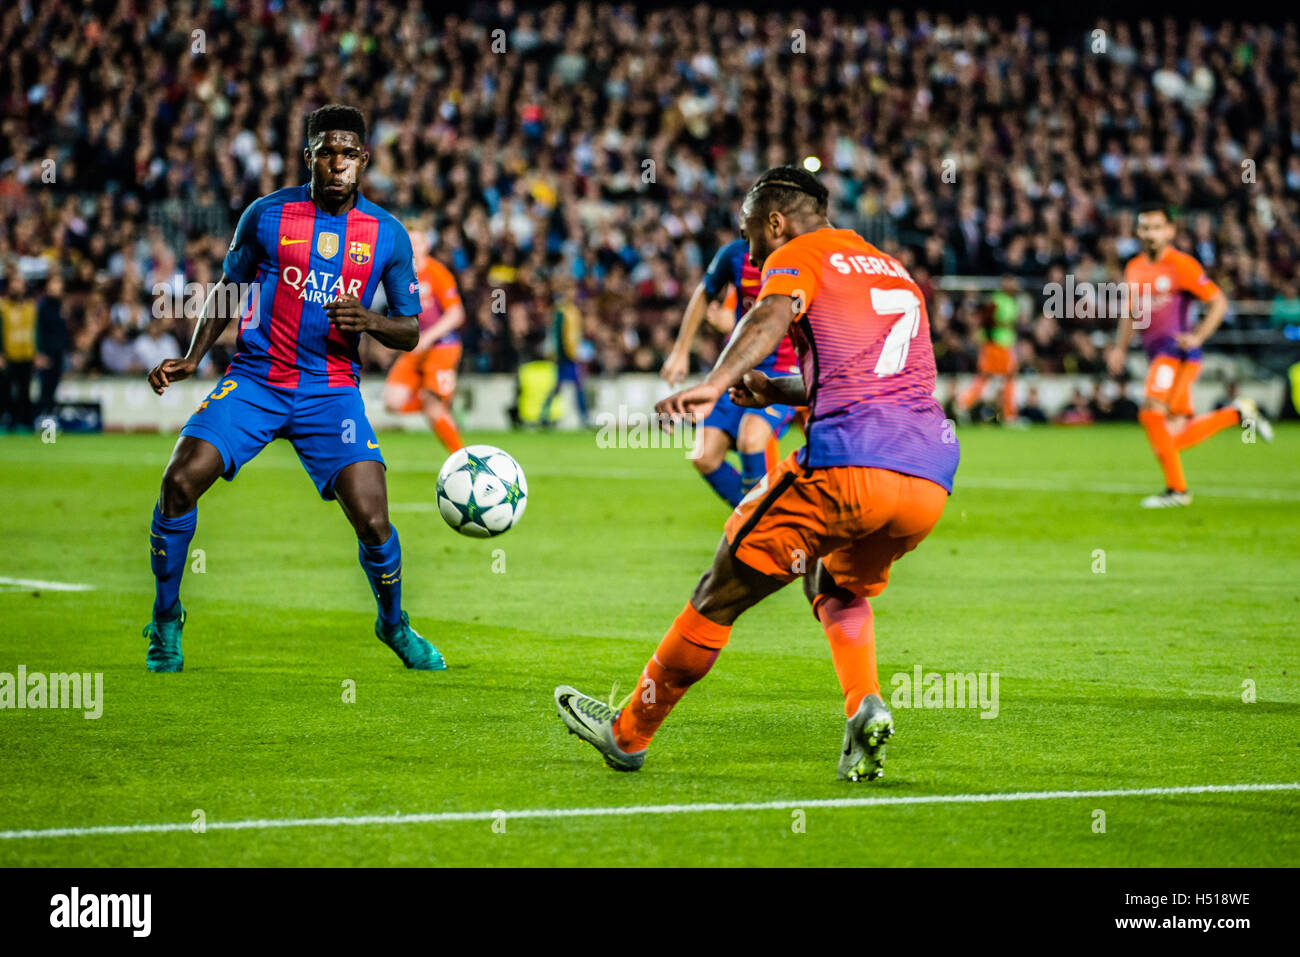 Barcelona, Catalonia, Spain. 19th Oct, 2016. Manchester City midfielder RAHEEM STERLING in action during the Champions League match between FC Barcelona and Manchester City at the Camp Nou stadium in Barcelona Credit:  Matthias Oesterle/ZUMA Wire/Alamy Live News Stock Photo